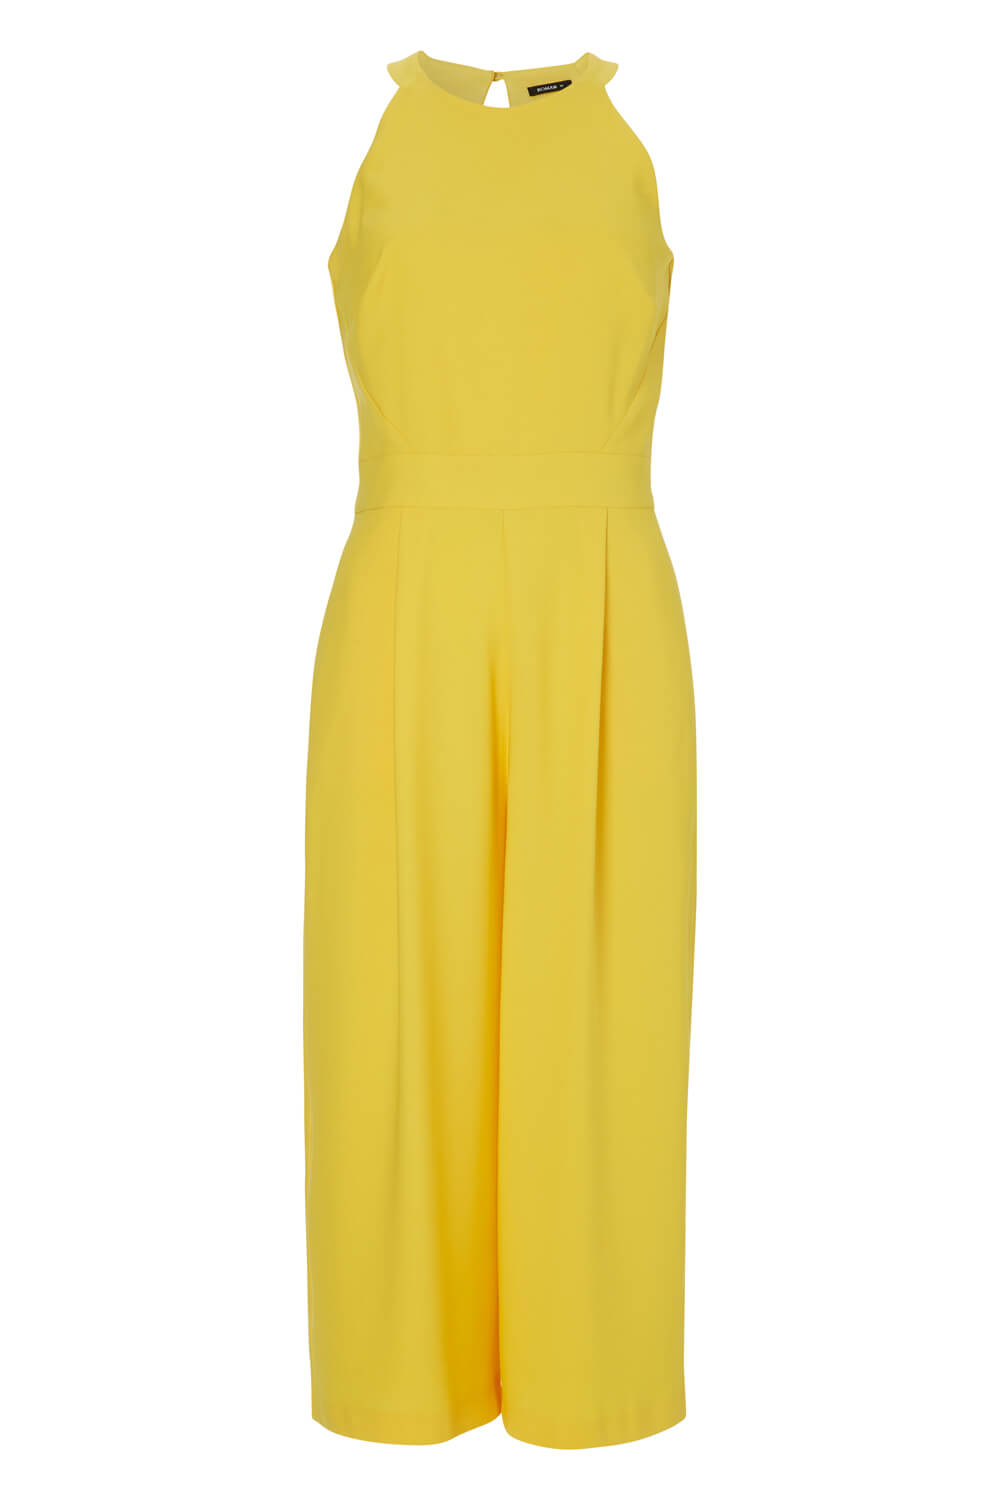 Yellow Halter Neck Culotte Jumpsuit, Image 4 of 4